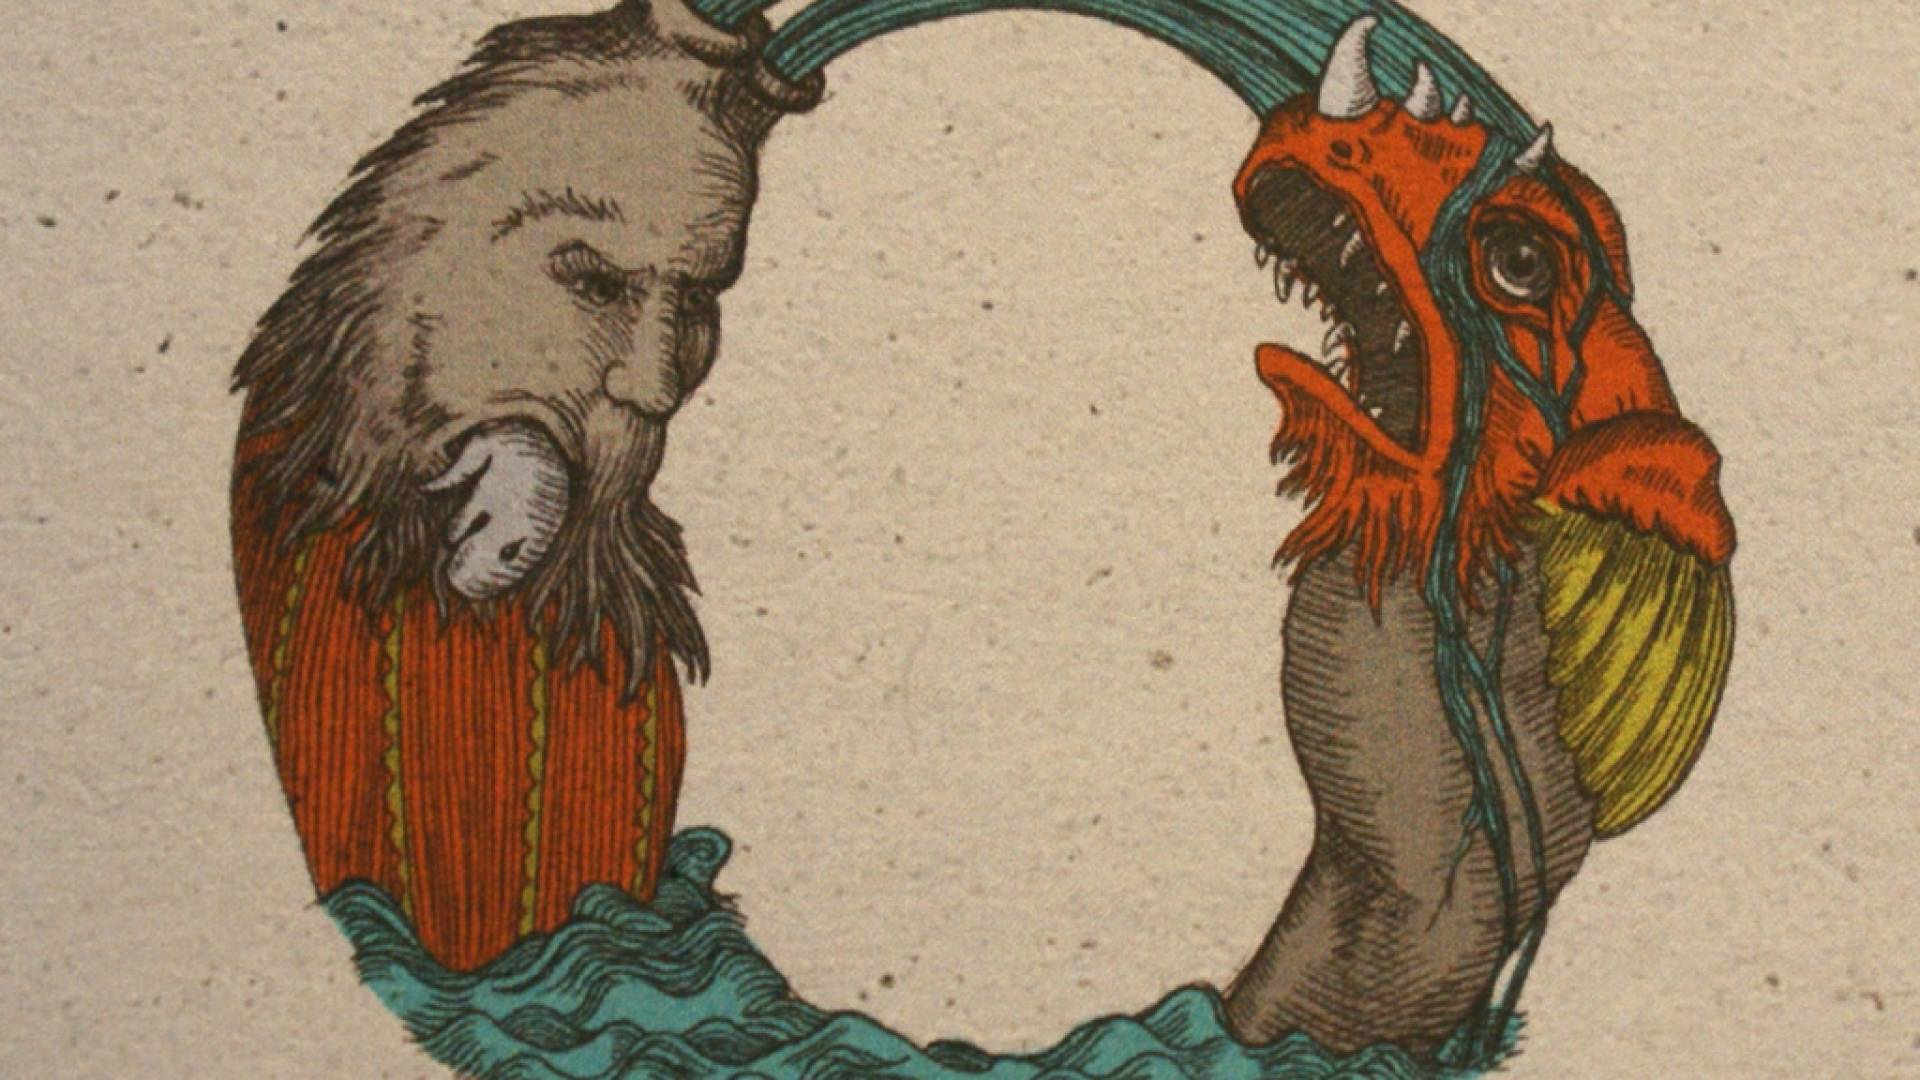 Medieval illustration of two-headed sea monster.